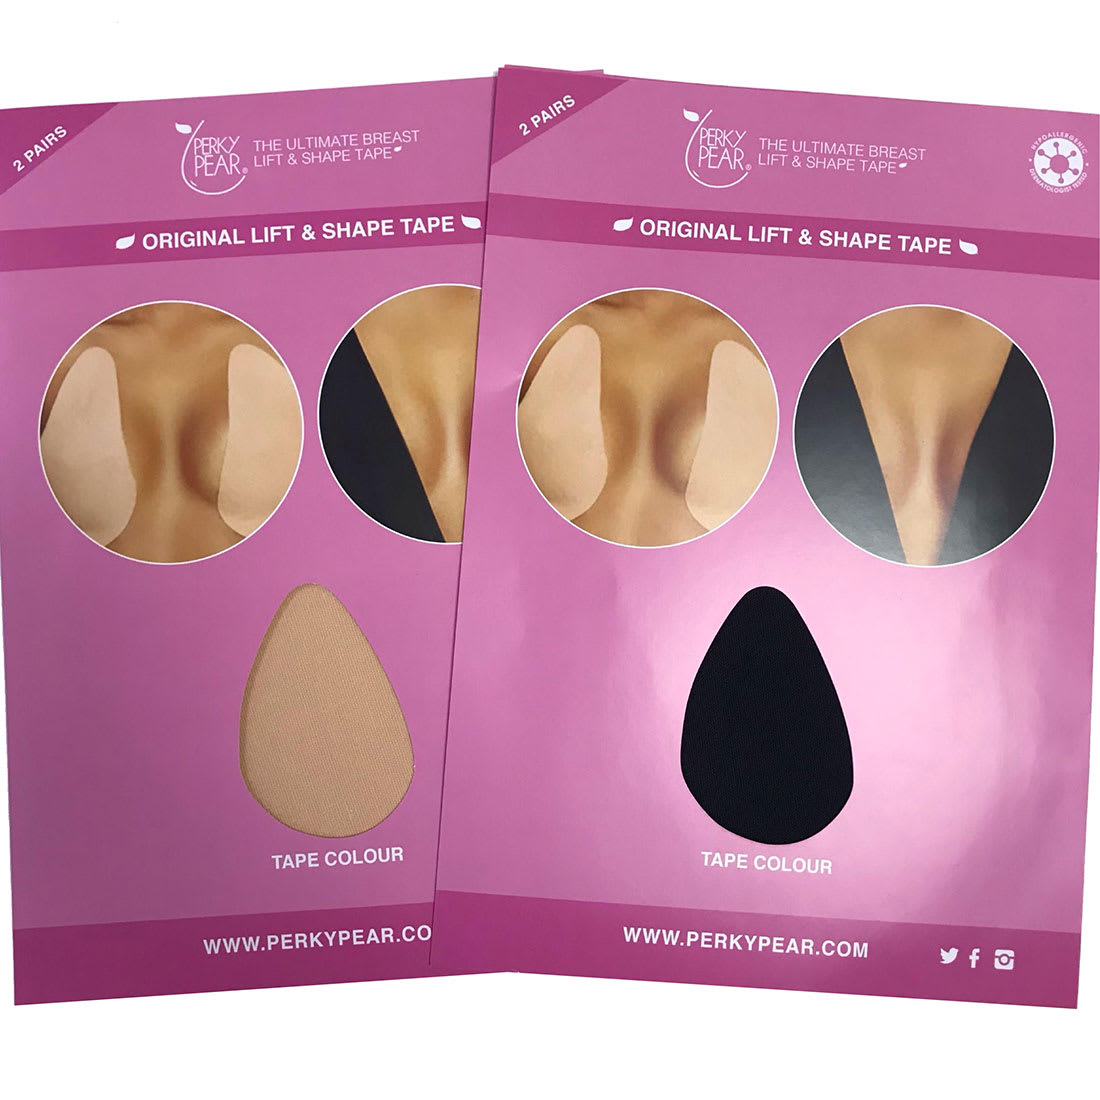 Perky Pear Lift and Shape Breast Tape